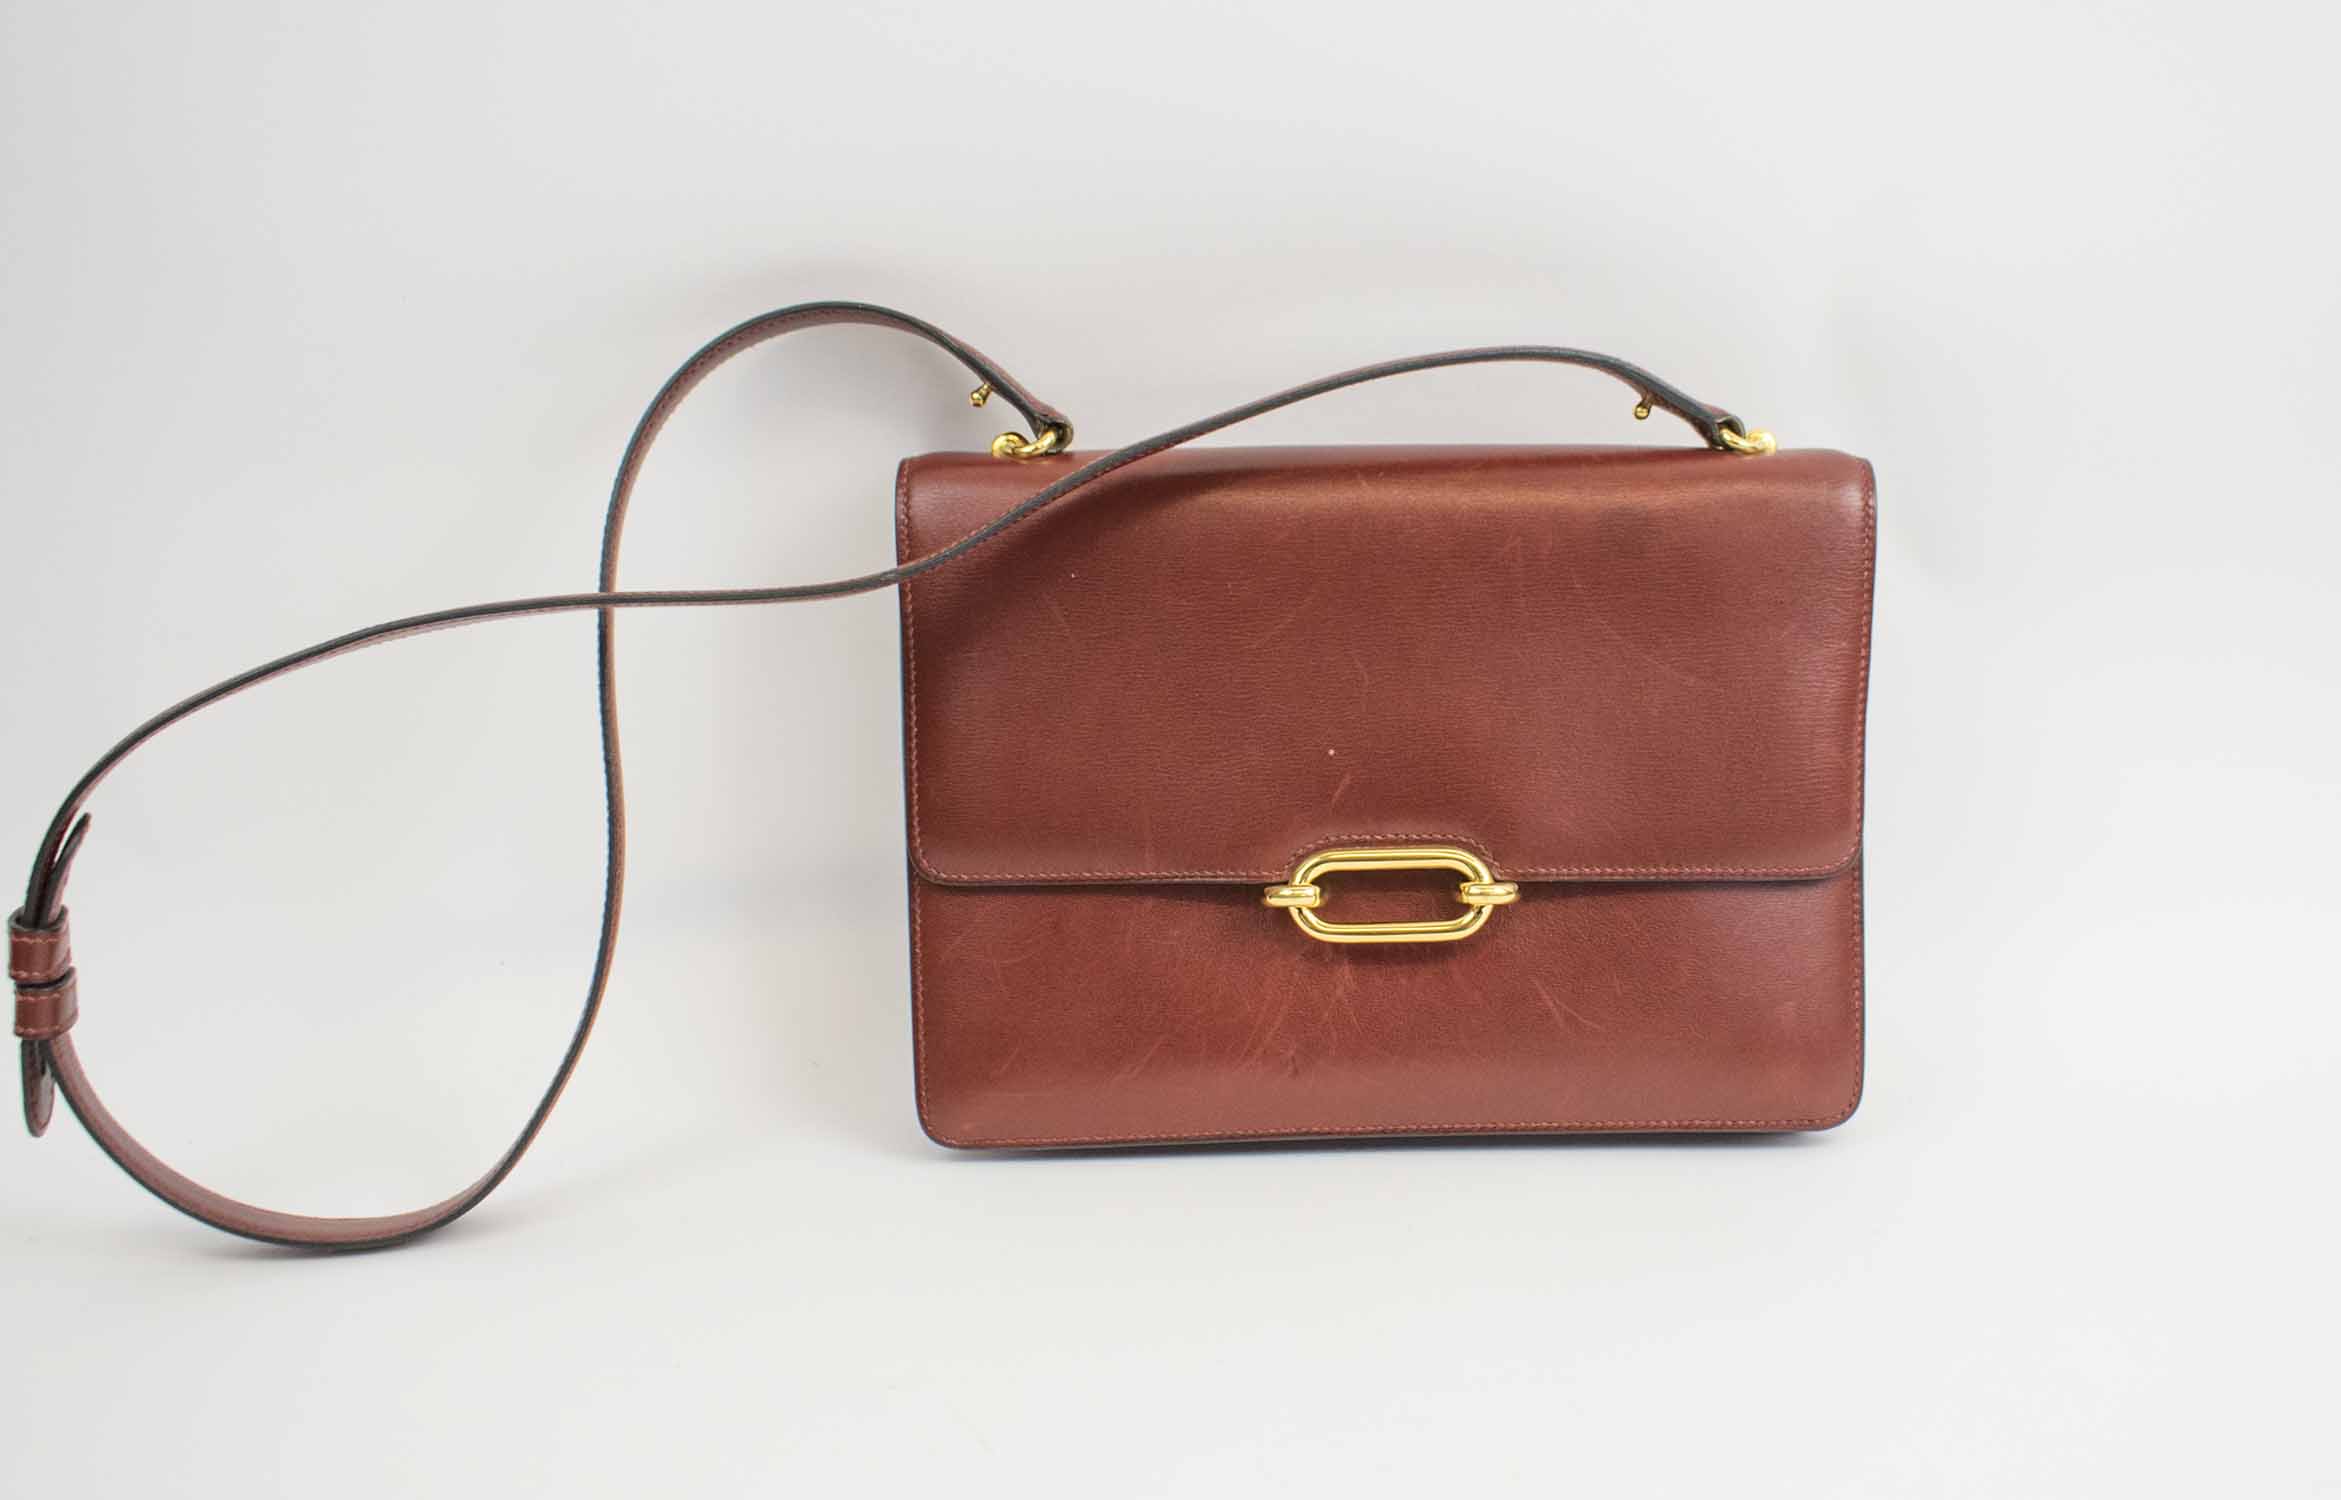 HERMES COCKTAIL SHOULDER BAG, burgundy box calf leather, flap front with an  oval closure that clips into the clasp, front slot section and few others  one with snap closure, gold tone hardware